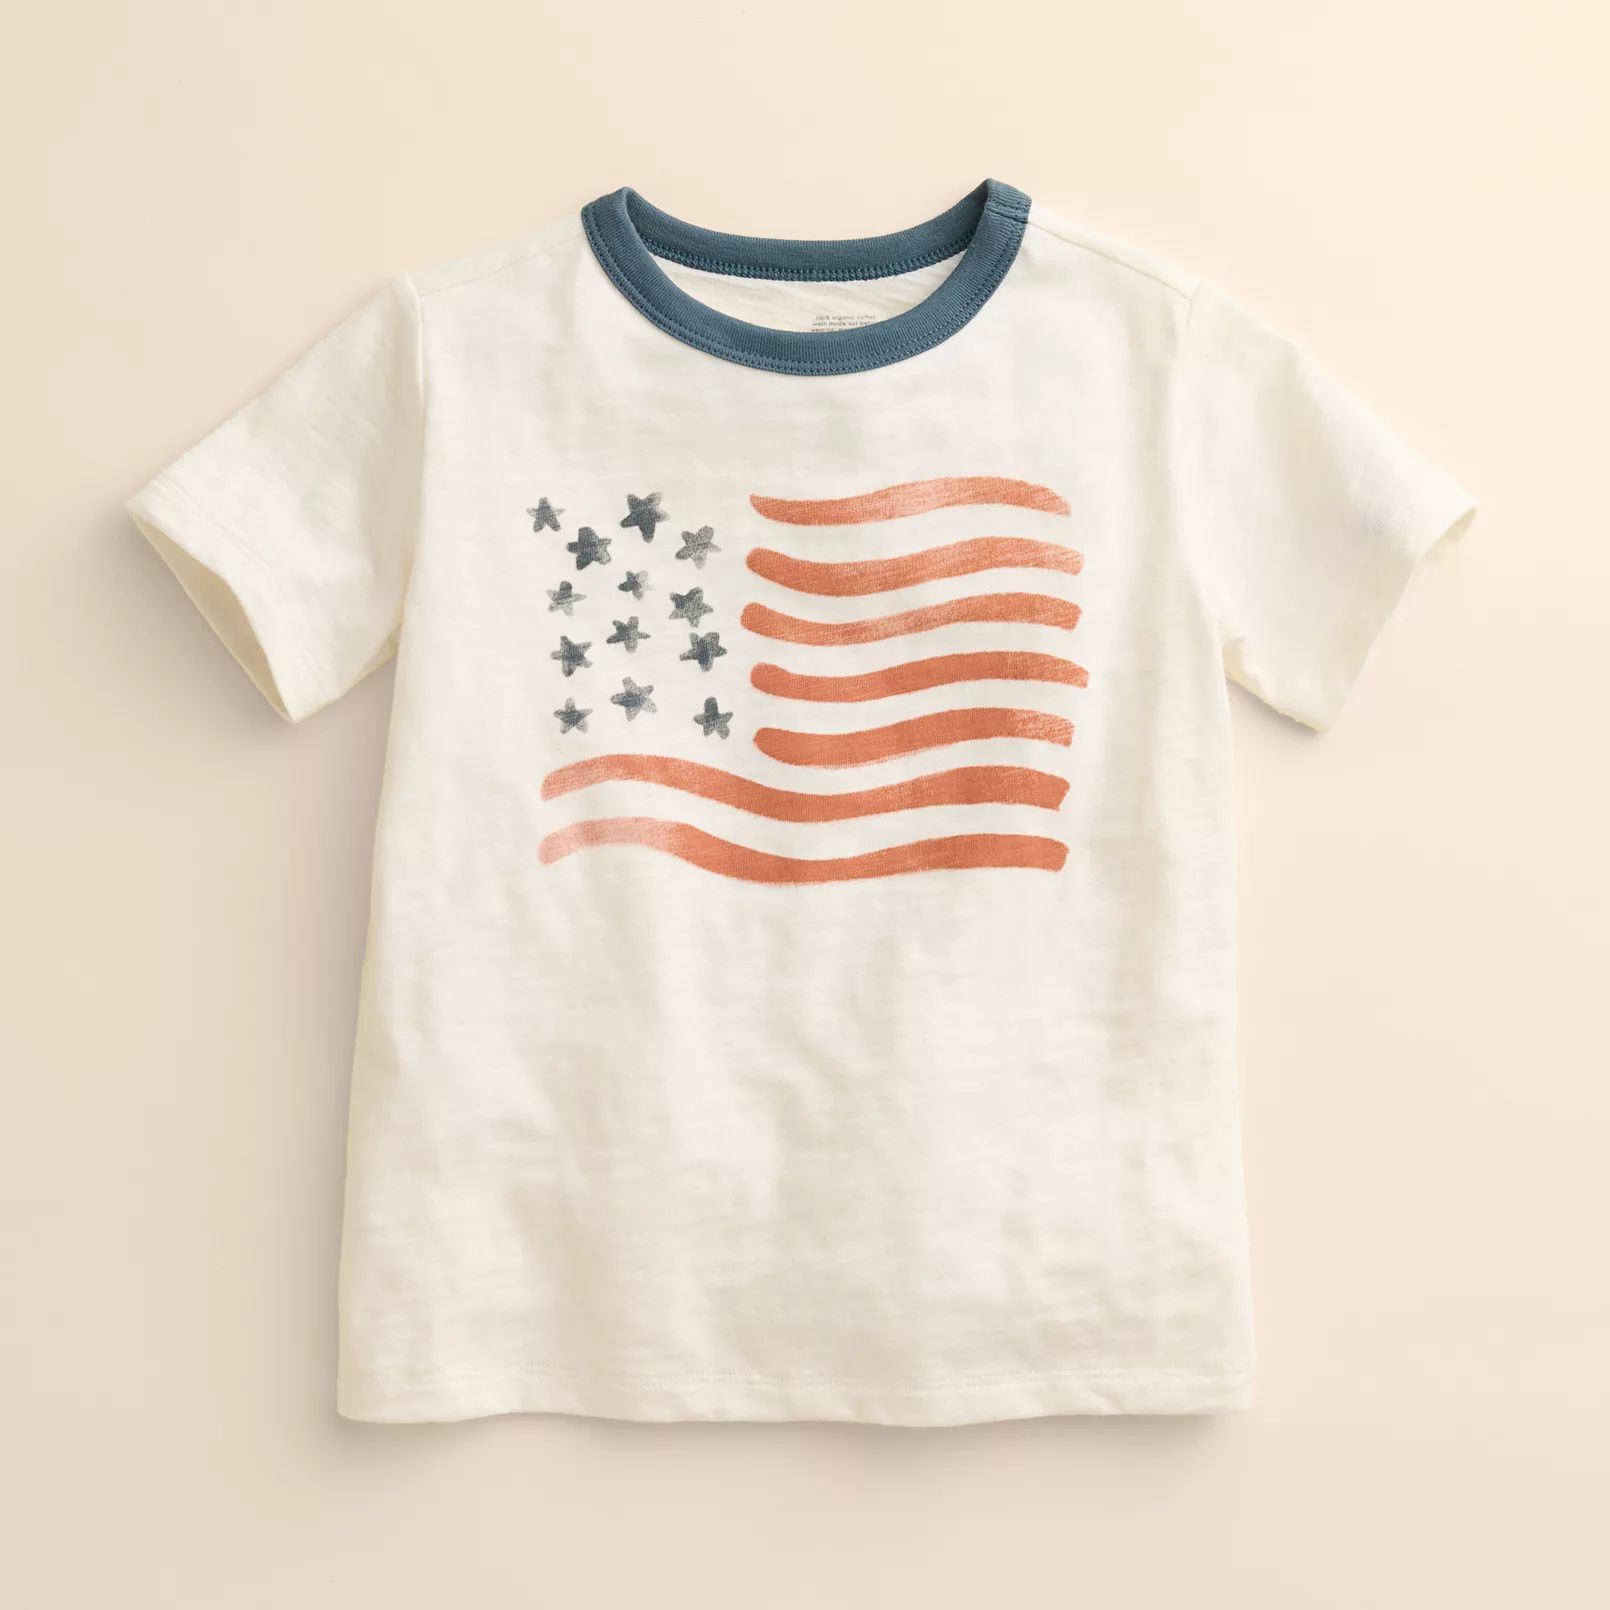 Kids 4-12 Little Co. by Lauren Conrad Relaxed Organic Tee | Kohl's